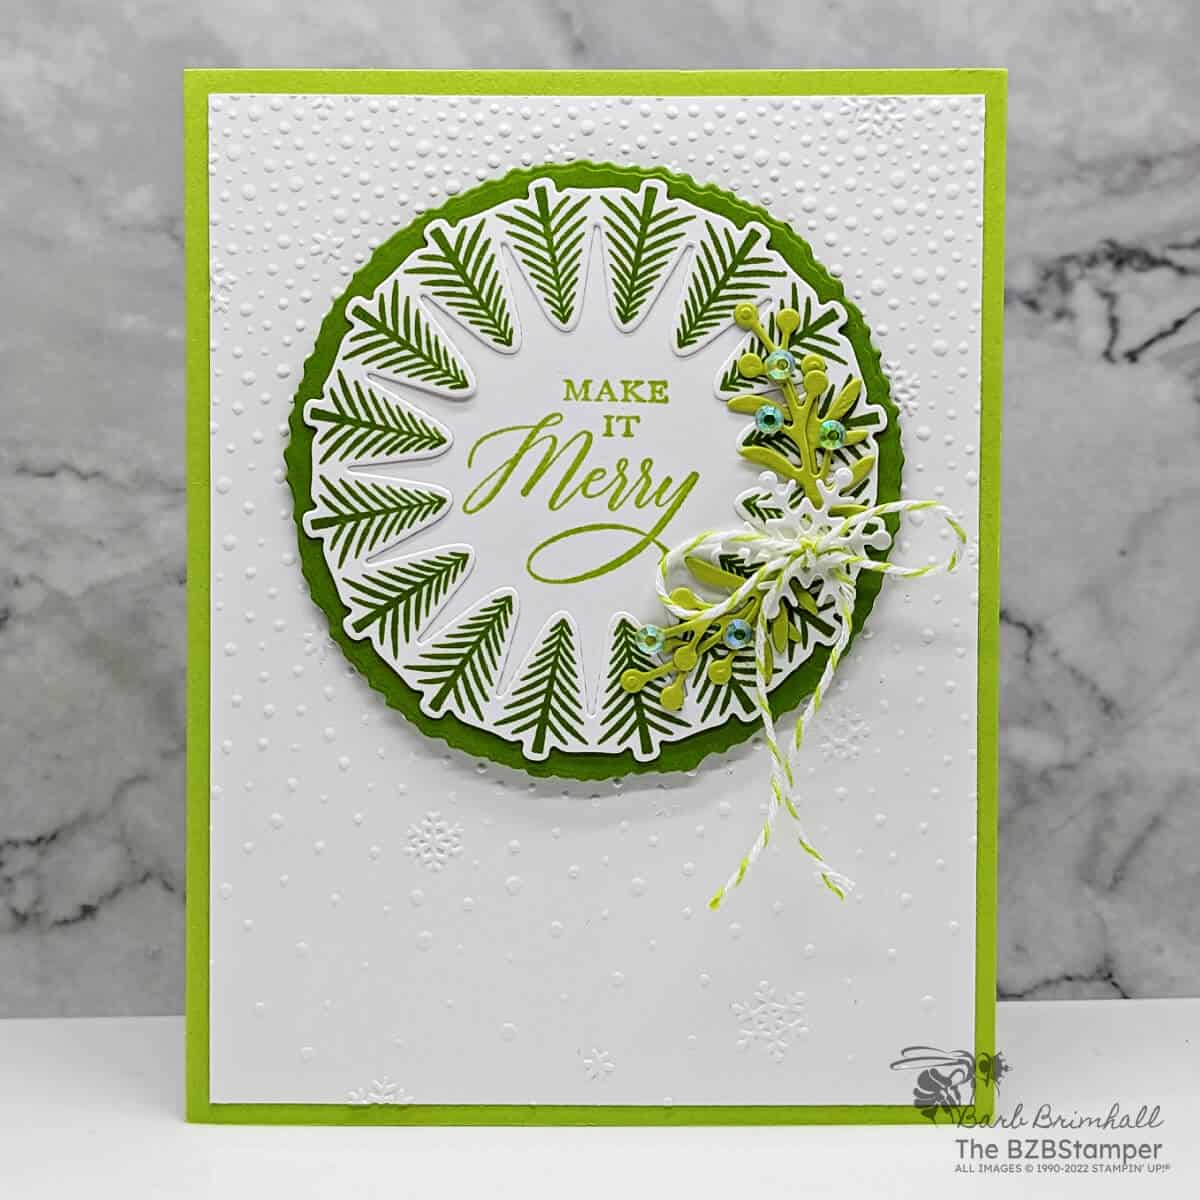 Wishes All Around Bundle by Stampin’ Up!